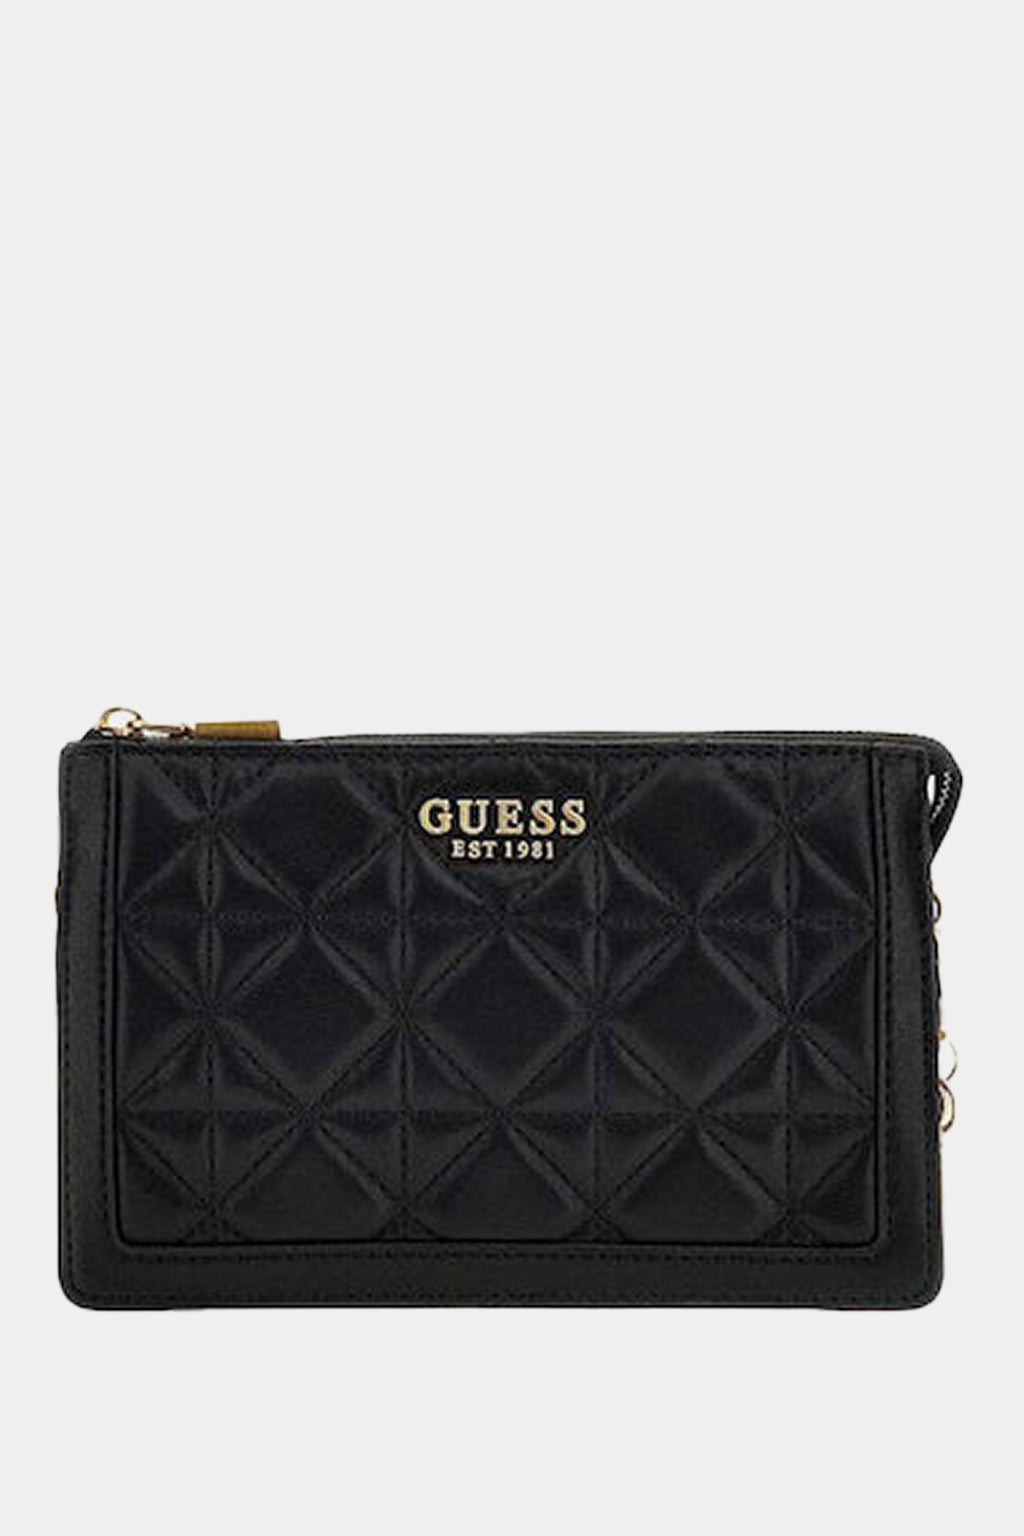 Guess -  Black Abey Multi Compartment Crossbody Bag